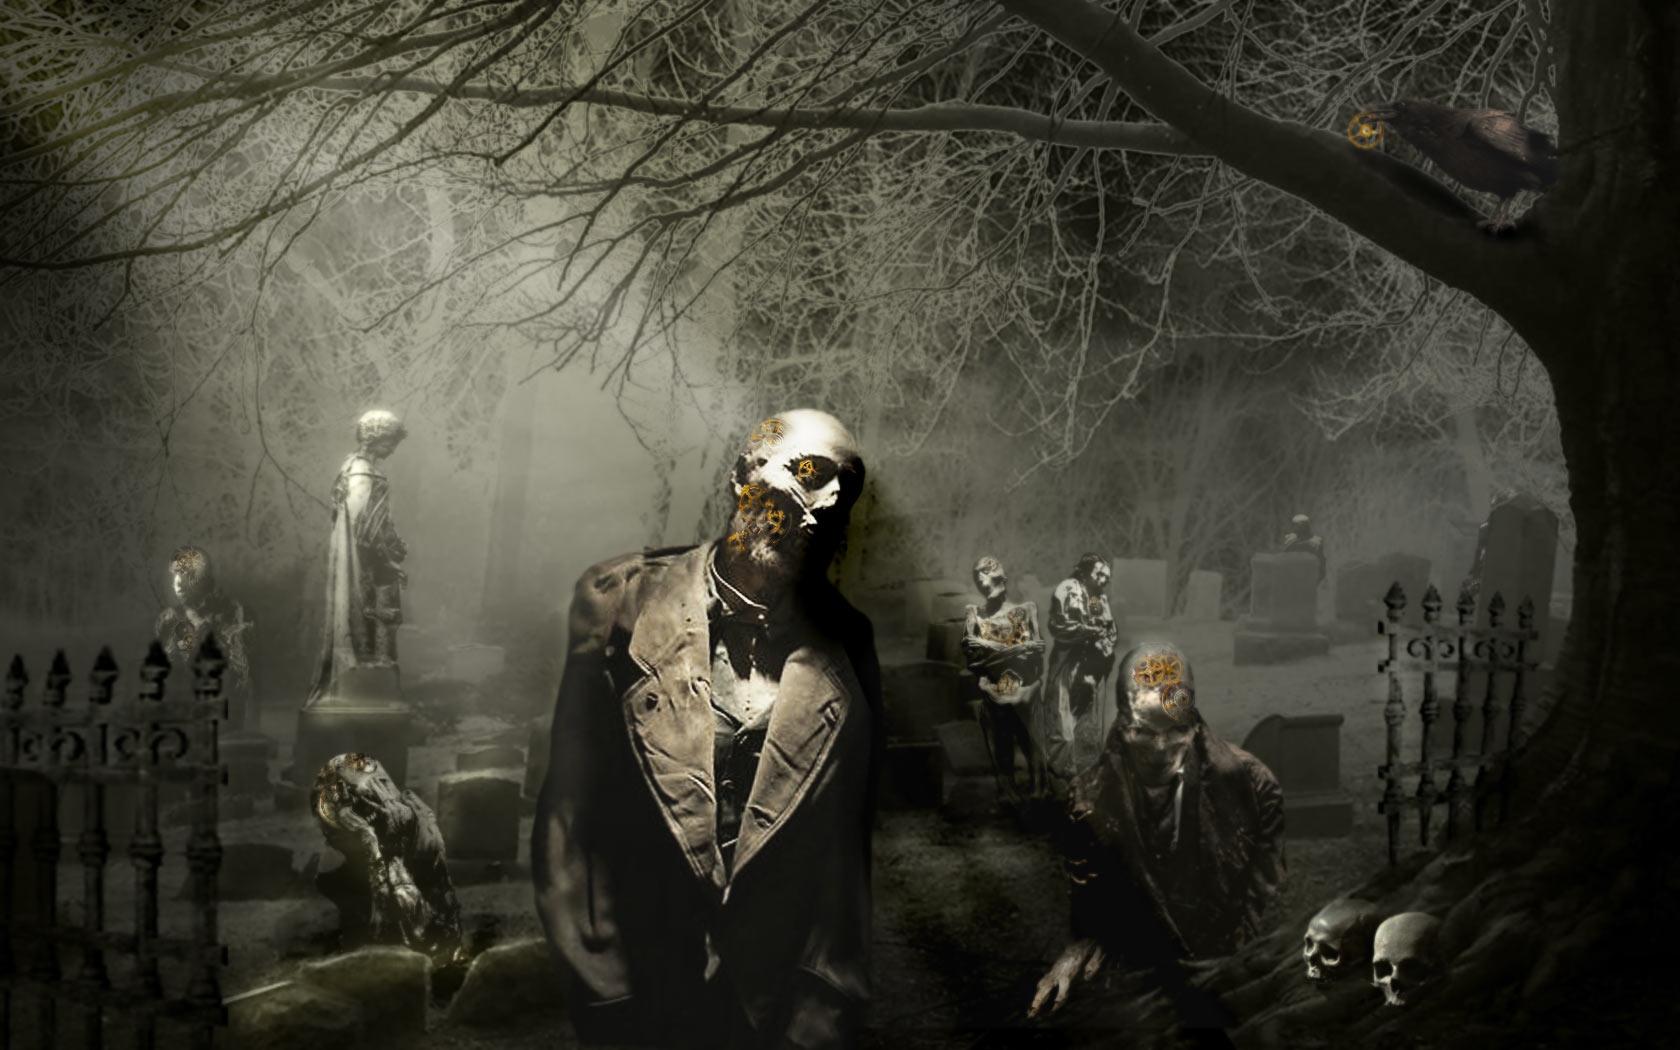 Zombies rising on cemetery wallpaper from Zombie wallpaper